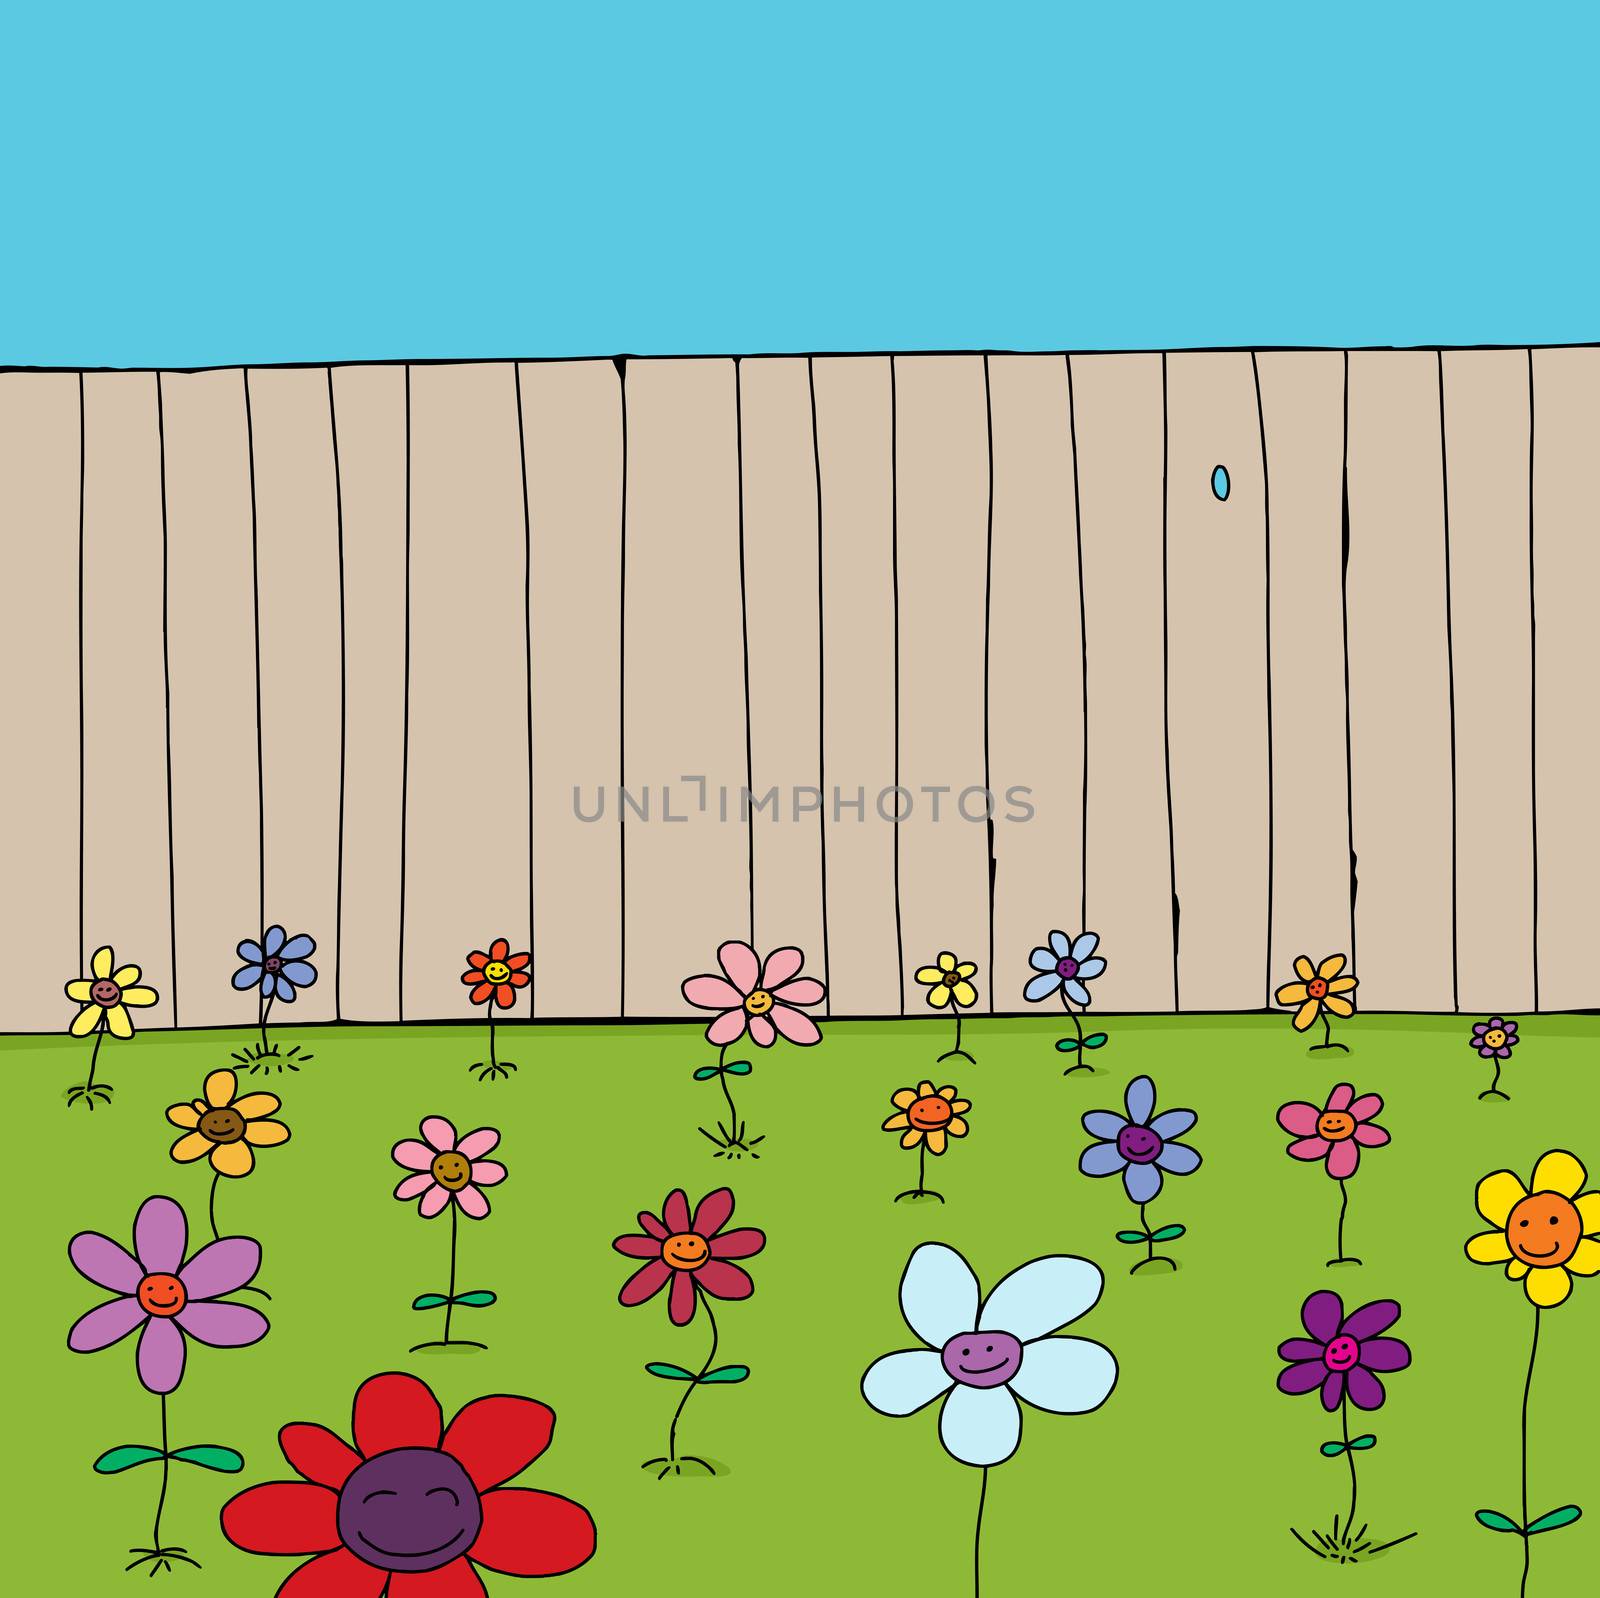 Cartoon of cute flowers in front of wooden fence